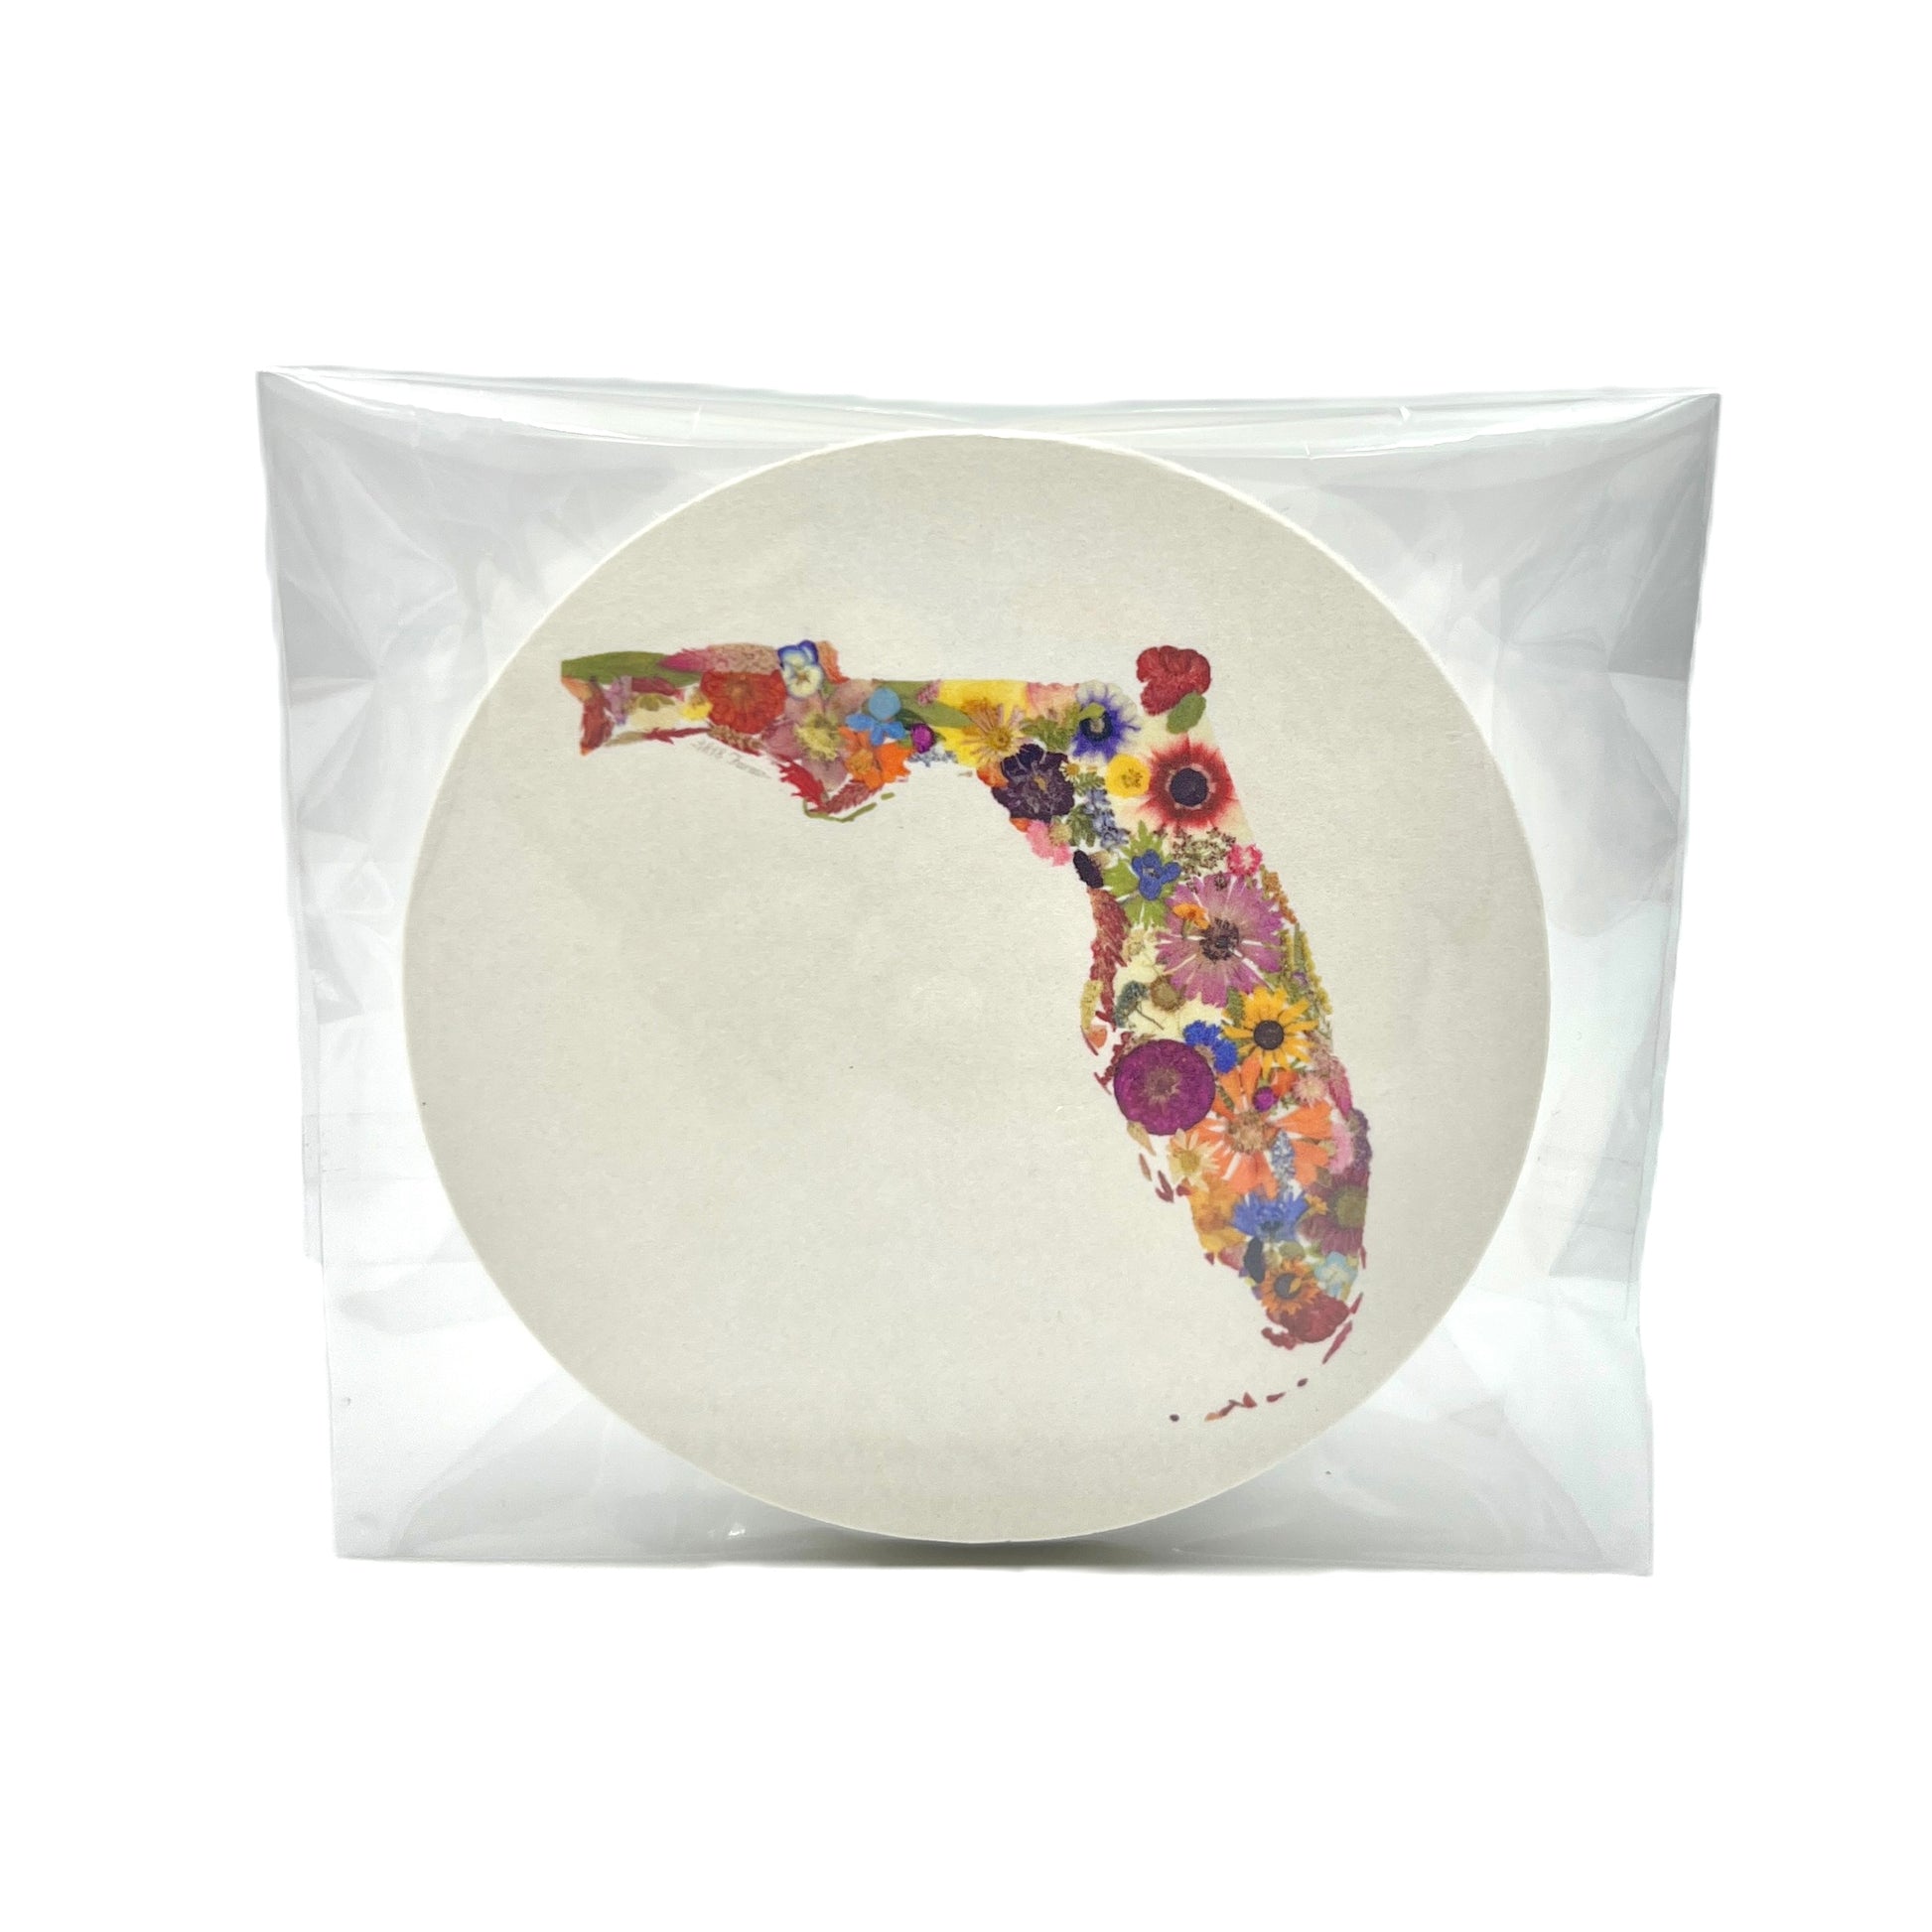 Florida Themed Coasters (Set of 6) Featuring Dried, Pressed Flowers - "Where I Bloom" Collection Coaster 1818 Farms   